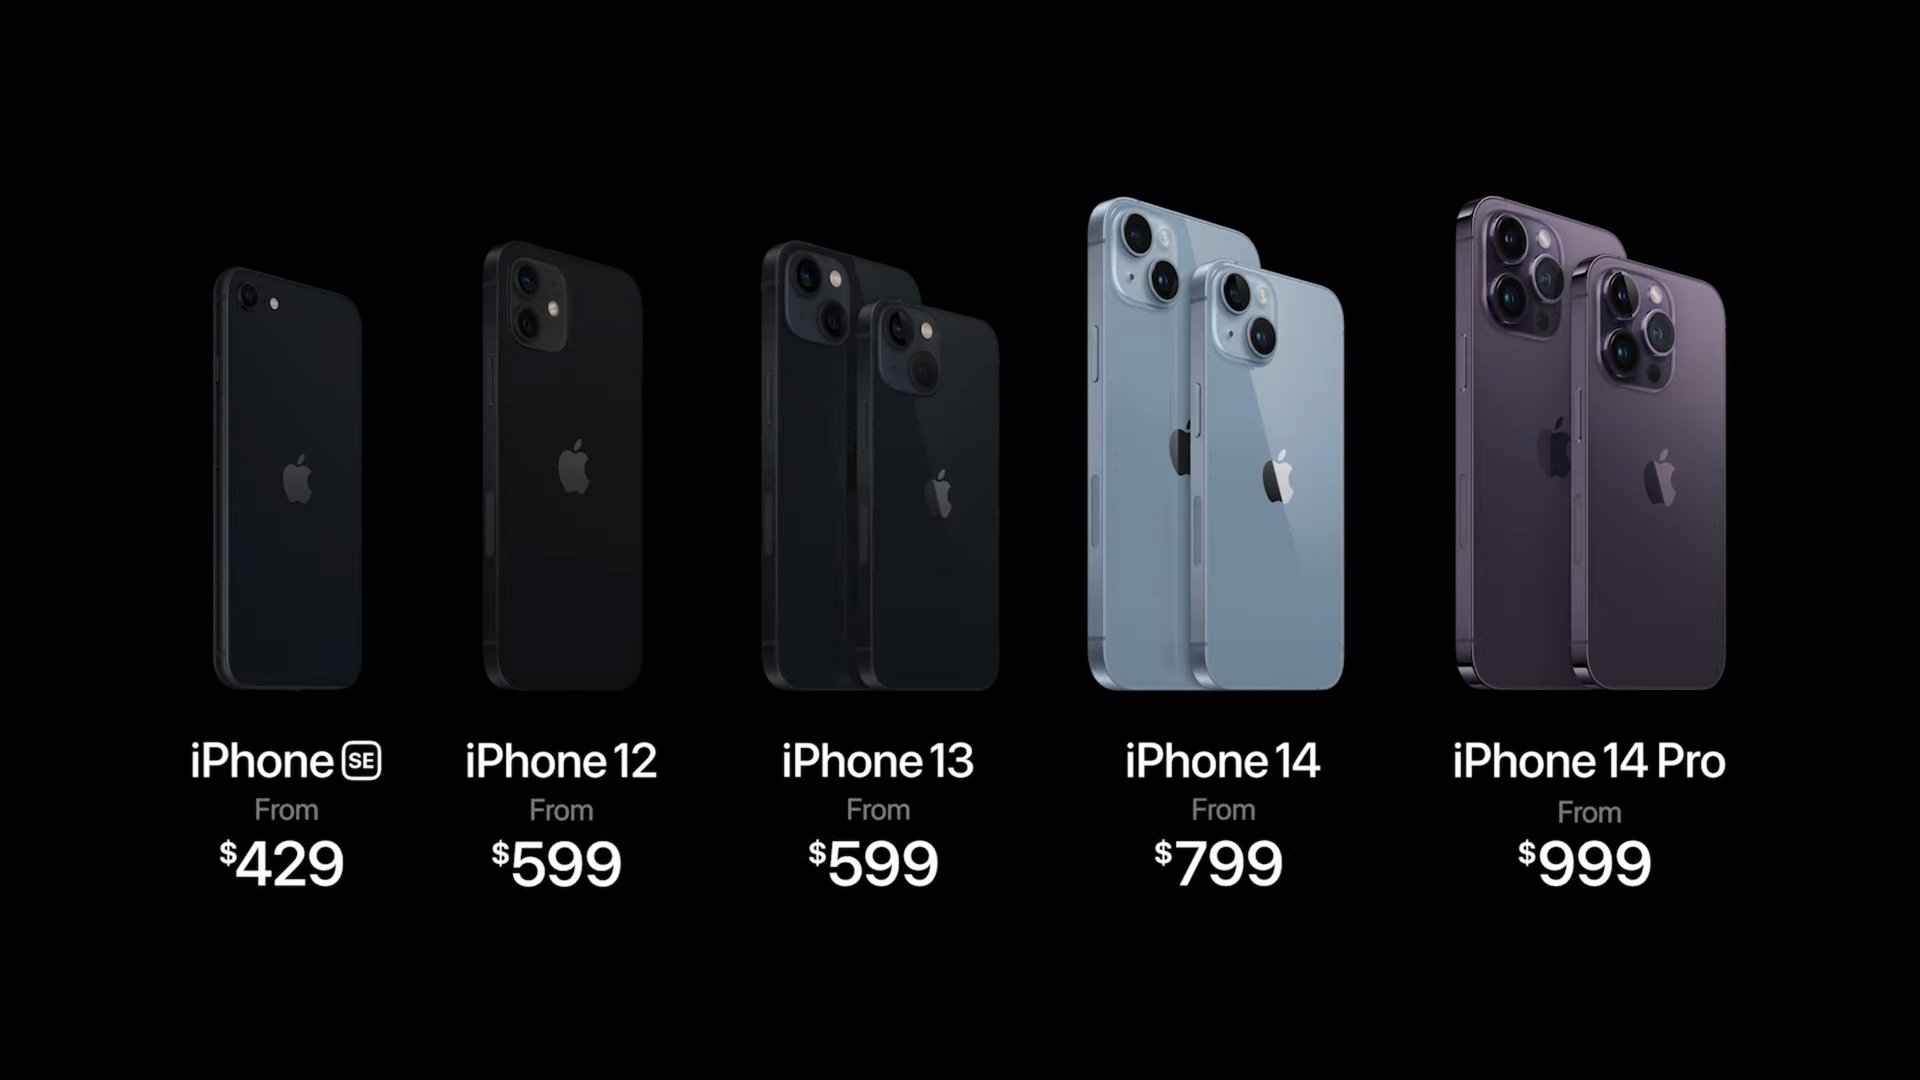 Apple Event 2022 lineup pricing on iPhone 2